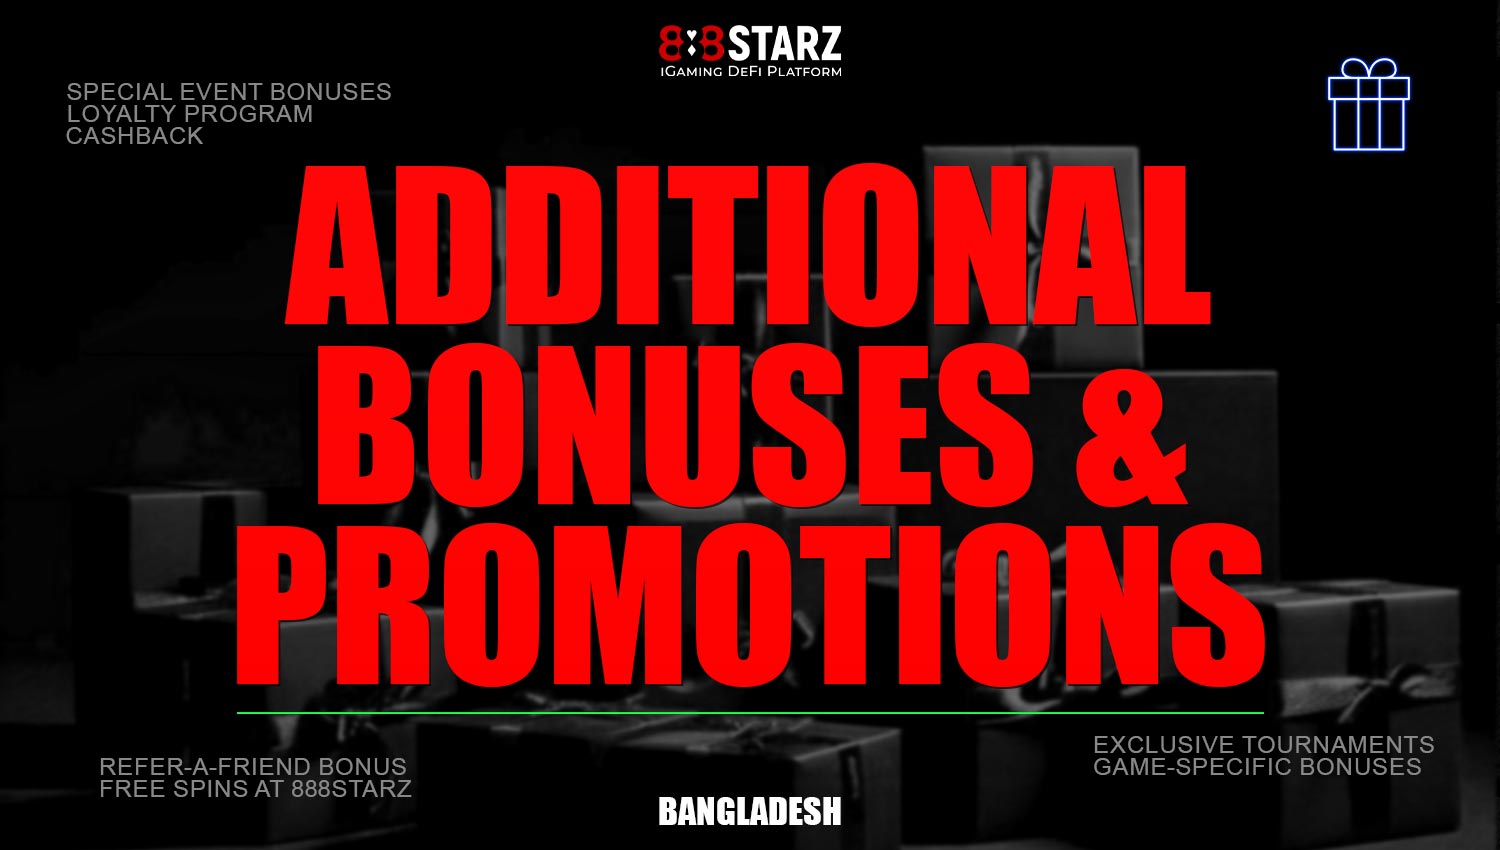 888Starz provides additional bonuses and promotions for players from Bangladesh.